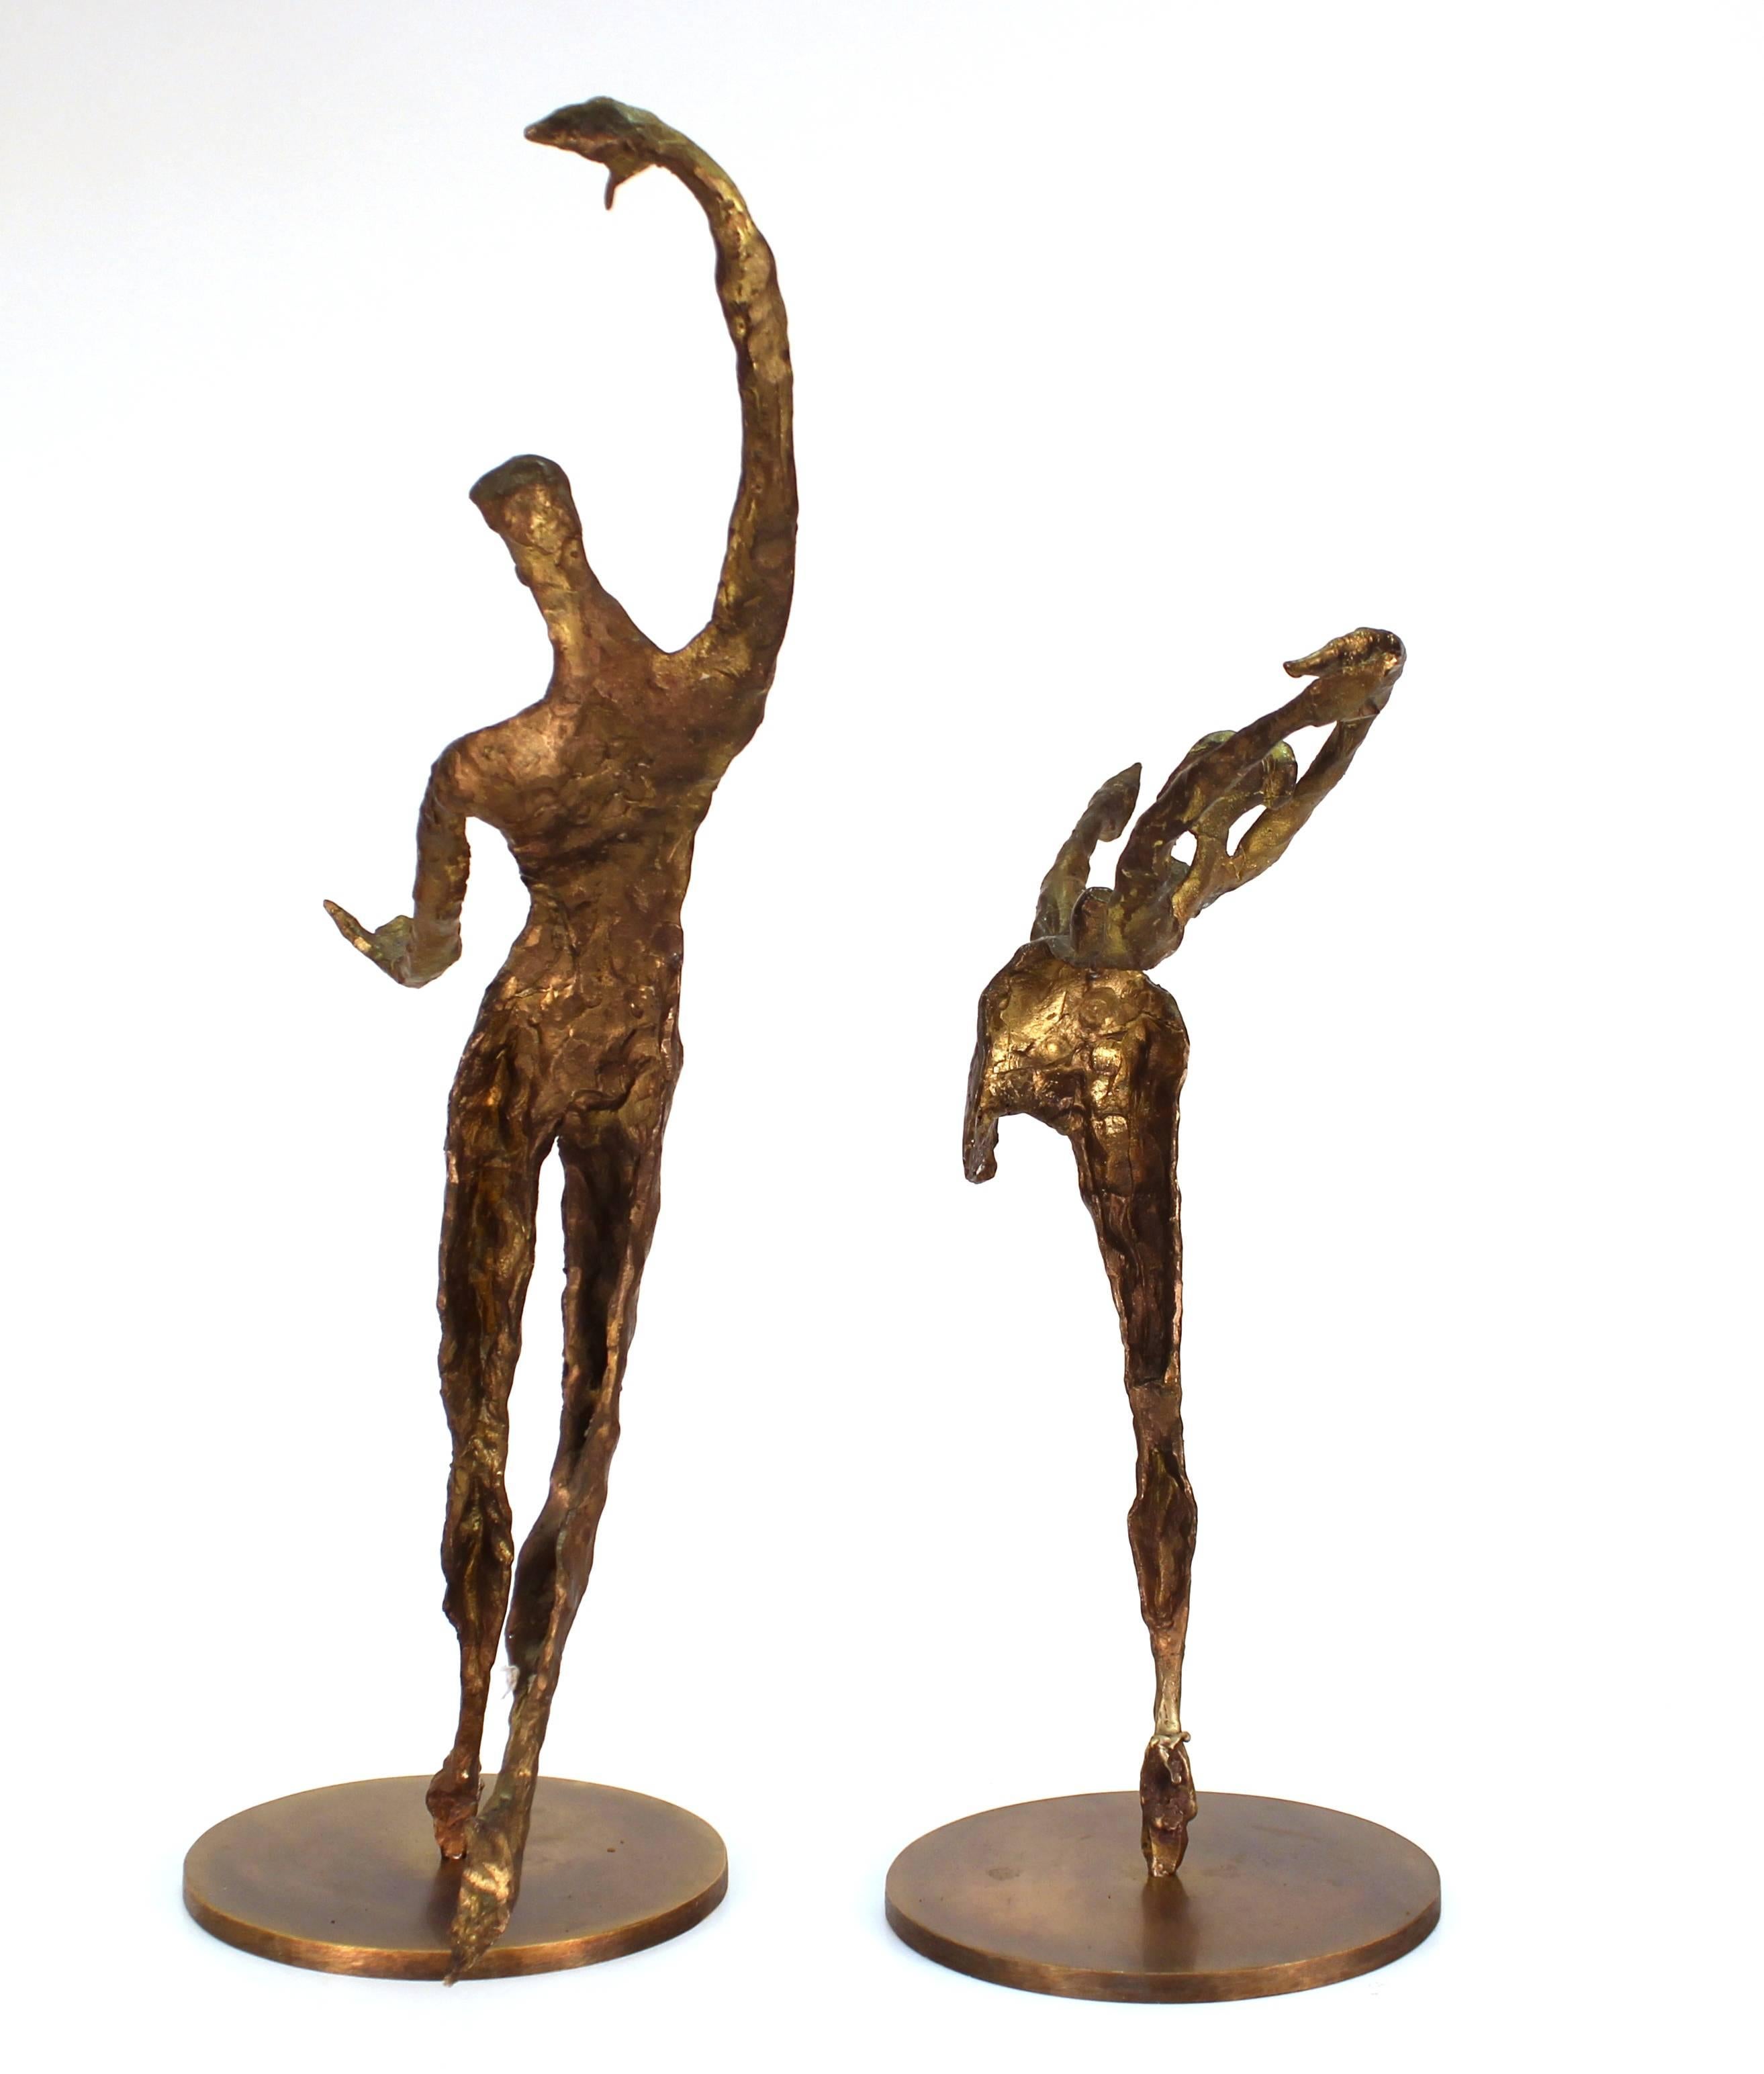 20th Century Modern Expressionist Bronze Sculptures of a Pair of Dancers, Signed